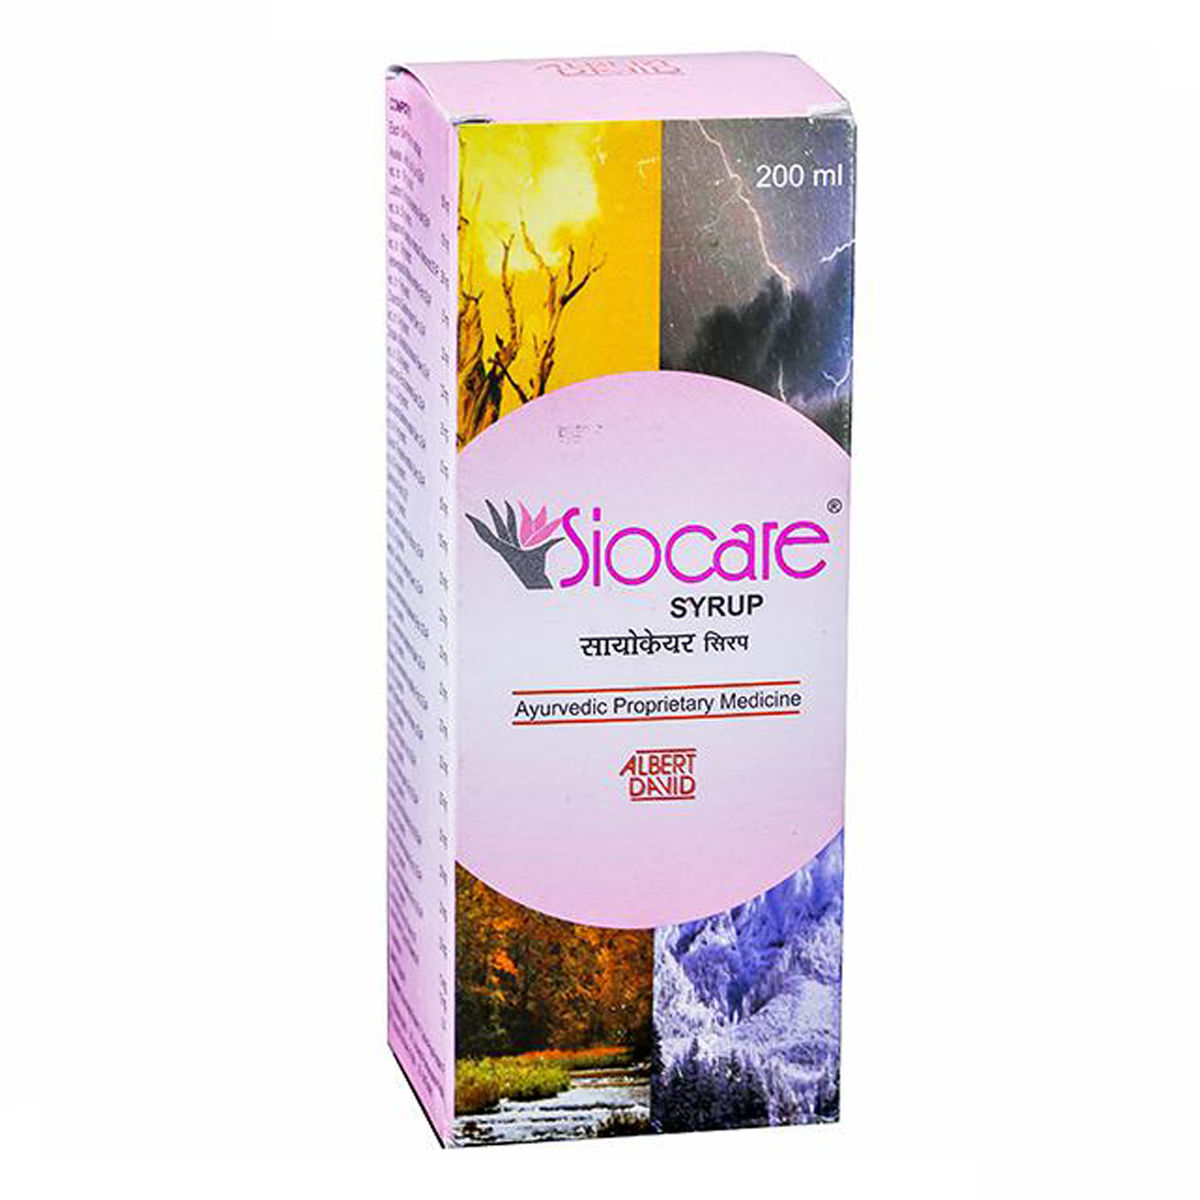 Buy Siocare Syrup, 200 ml Online